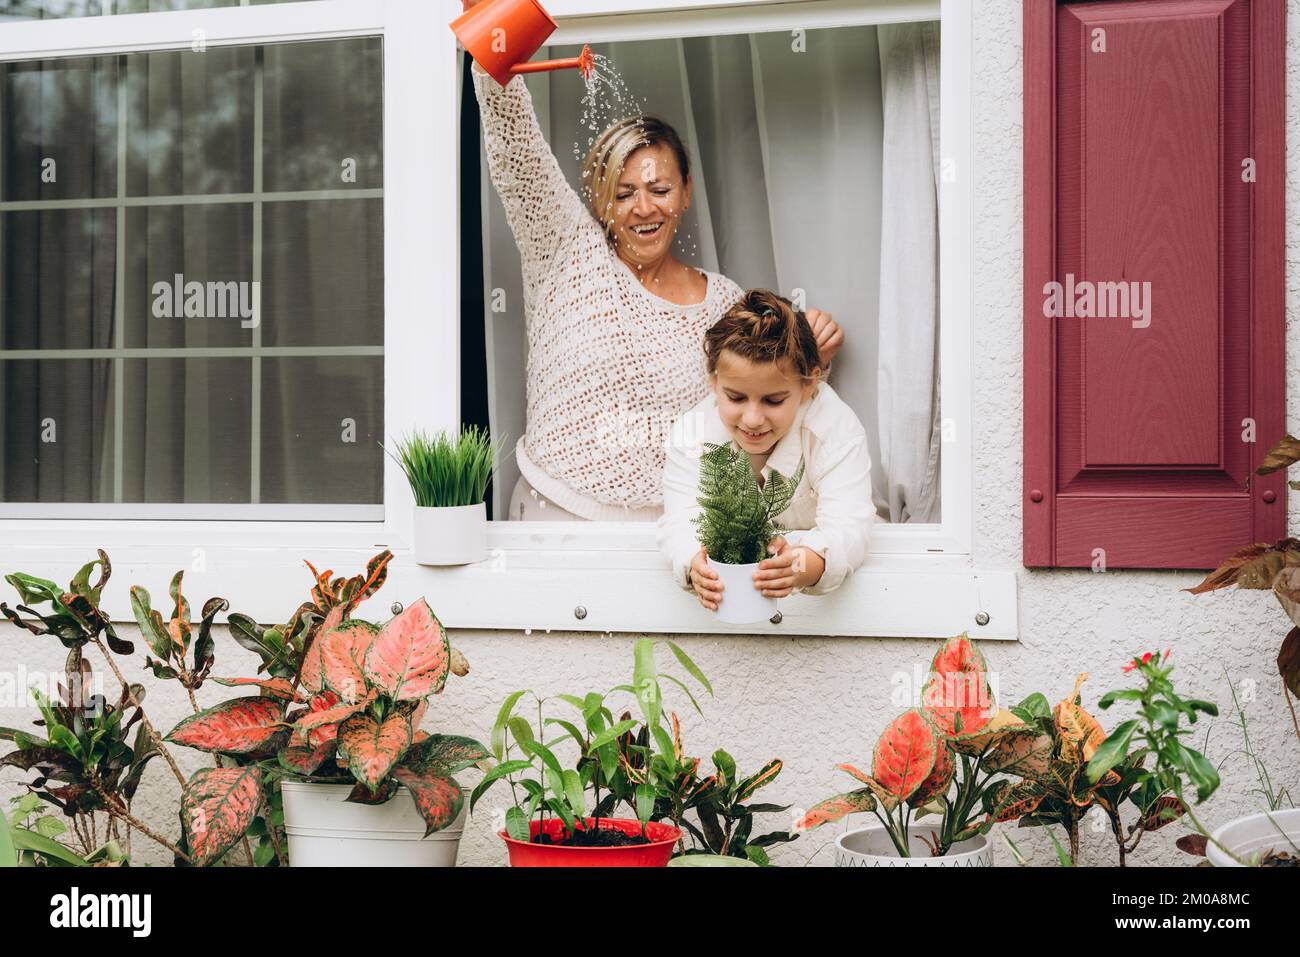 Girl with mom watering plants from a watering can Stock Photo